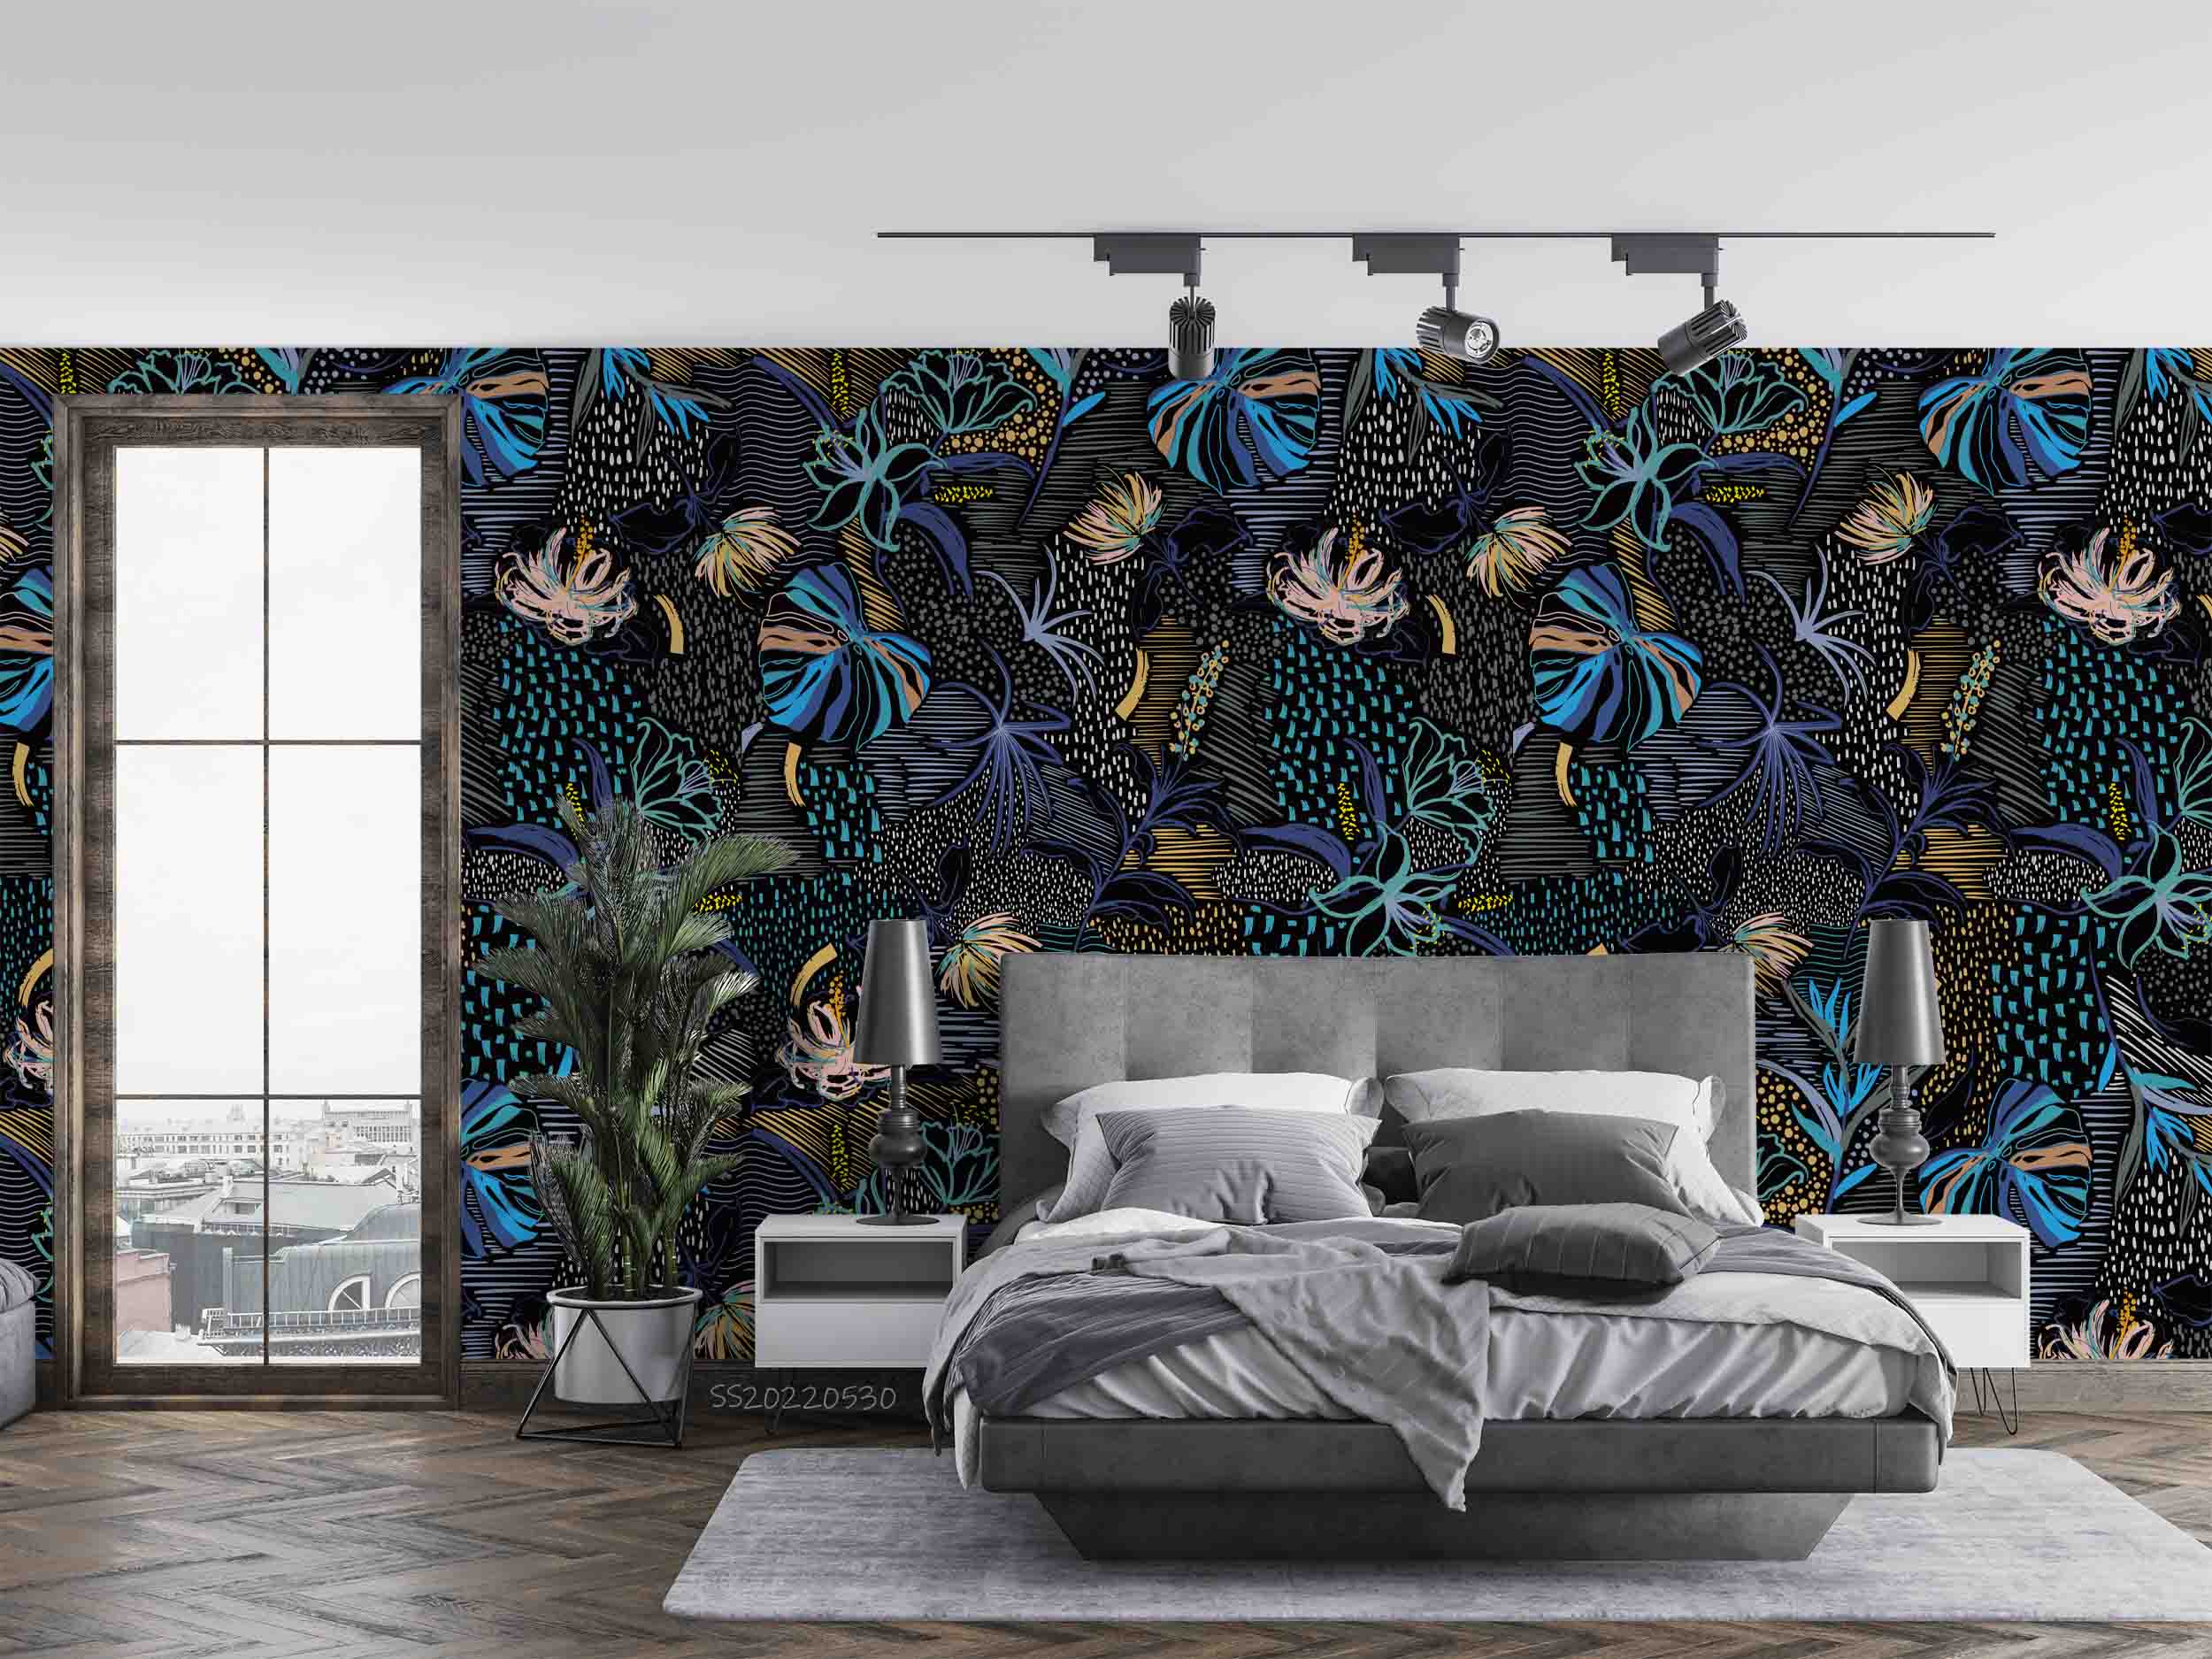 3D Vintage Abstract Plant Leaf Floral Wall Mural Wallpaper GD 65- Jess Art Decoration